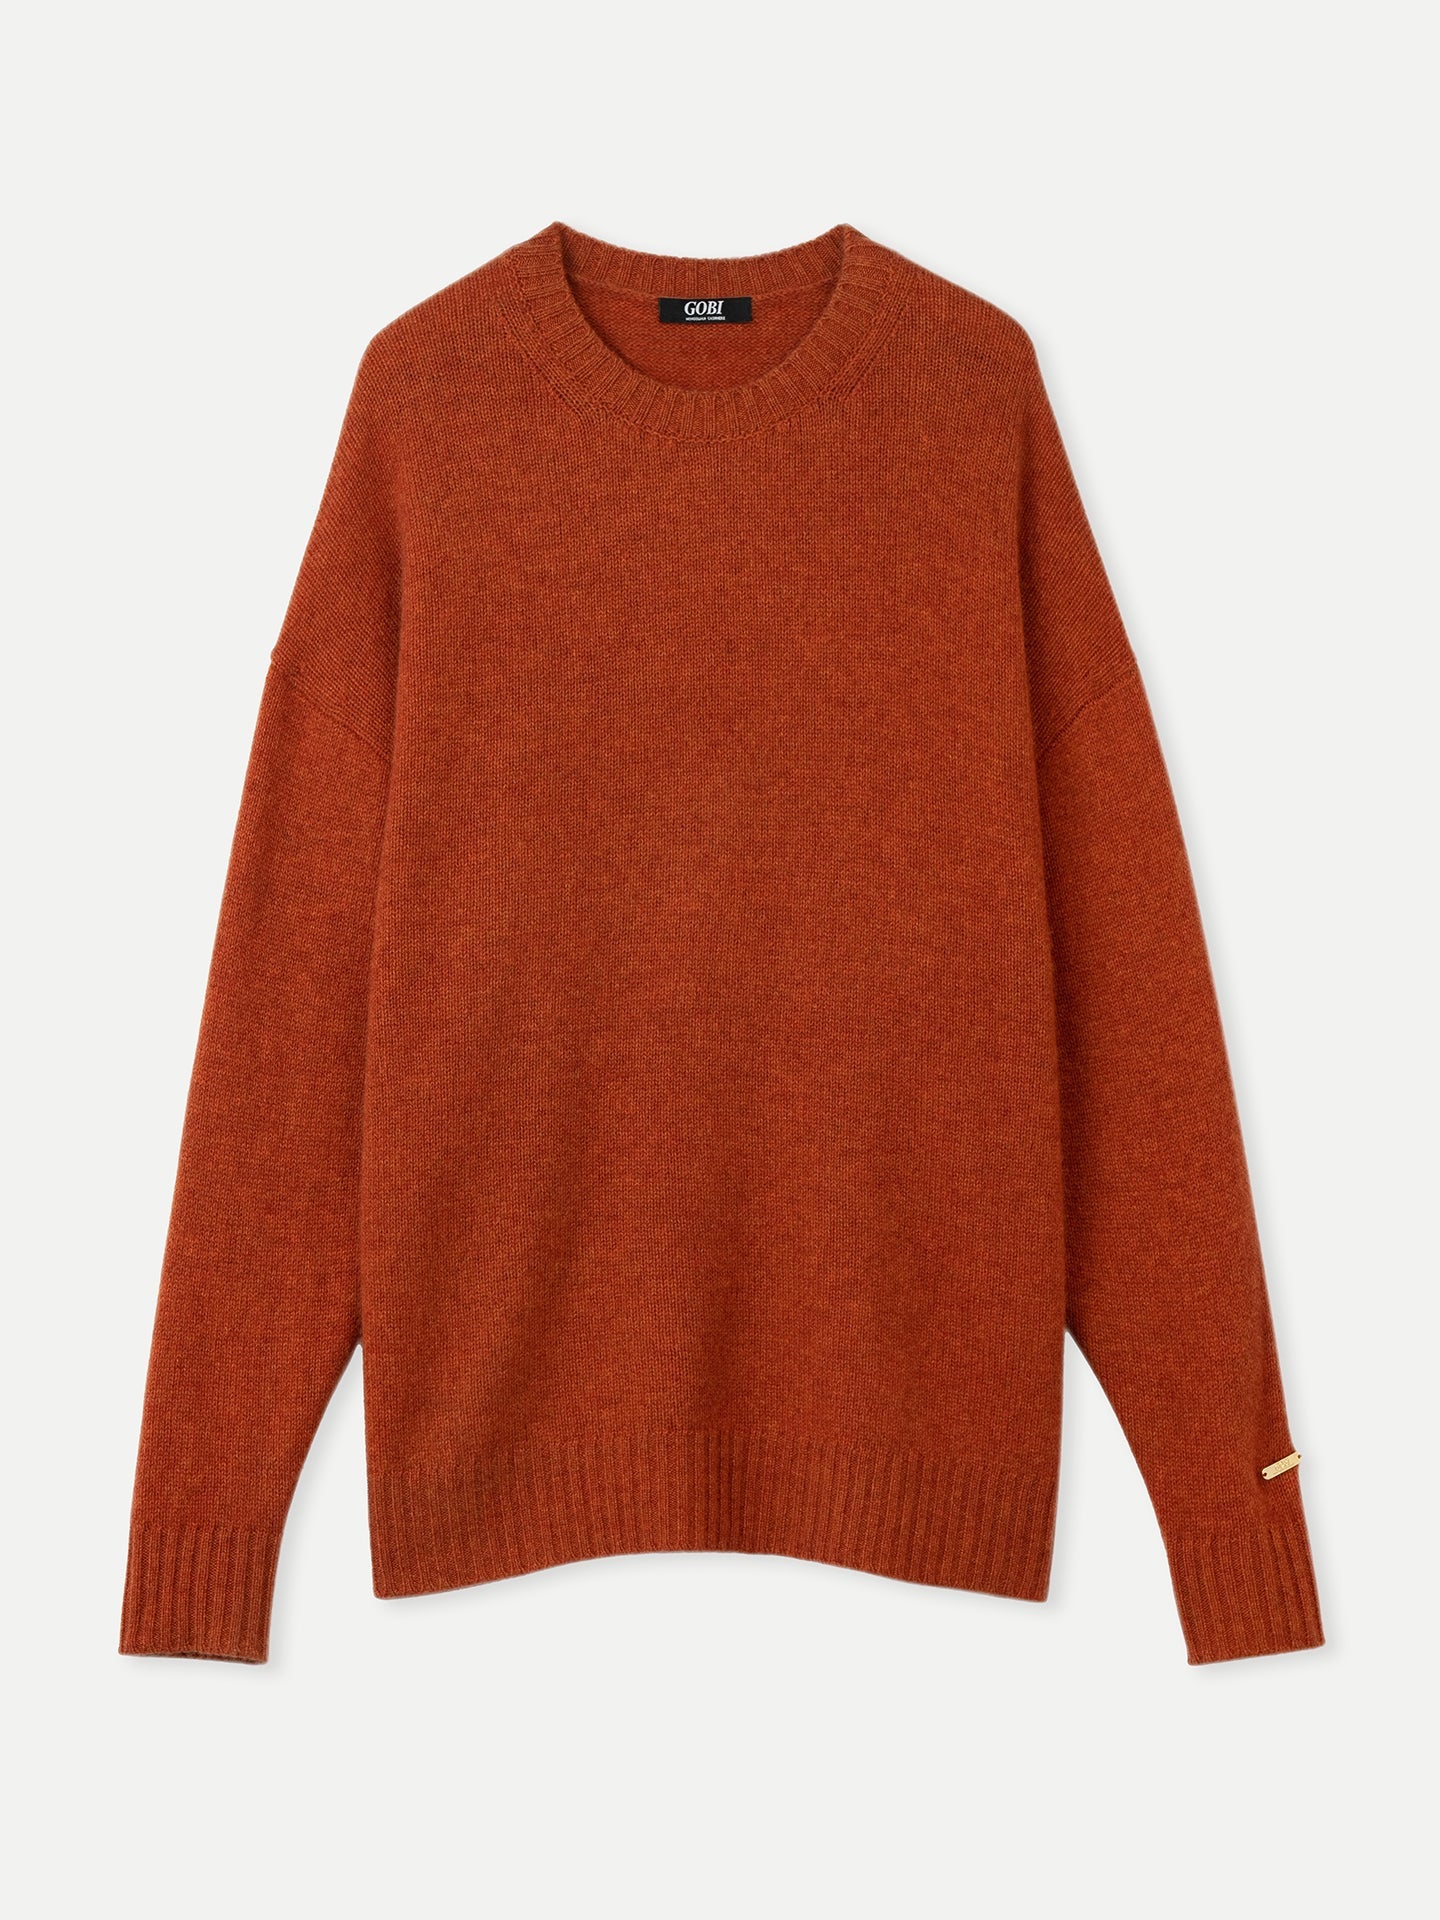 Women's GOBI Cashmere Crew-Neck Jumper Red - Country-Chic Collection